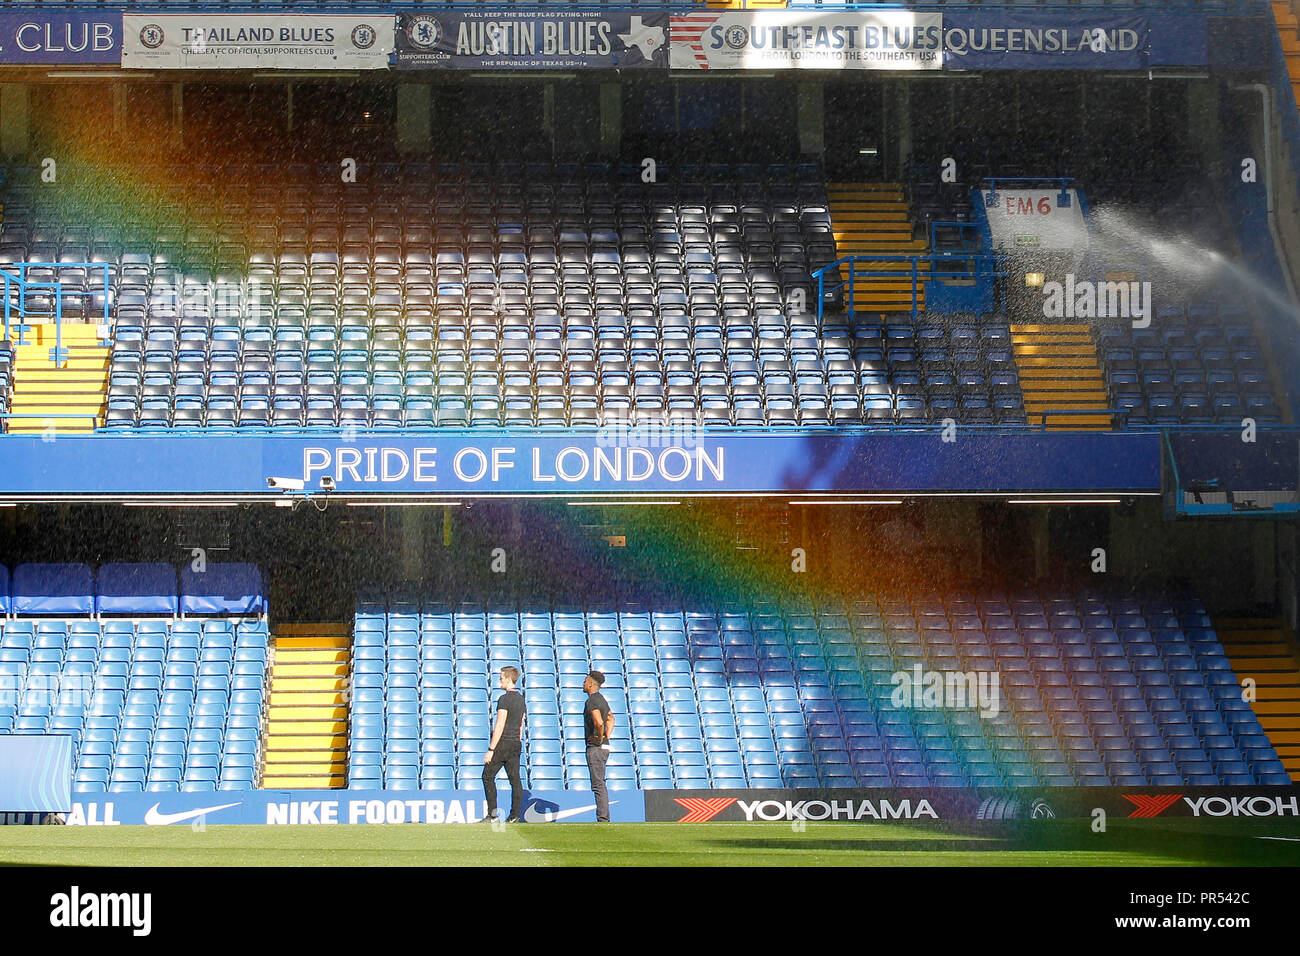 Pride colours arch across a sign depicting the Pride of London during the  Premier League match between Chelsea and Liverpool at Stamford Bridge,  London, England on 29 September 2018. Photo by Carlton